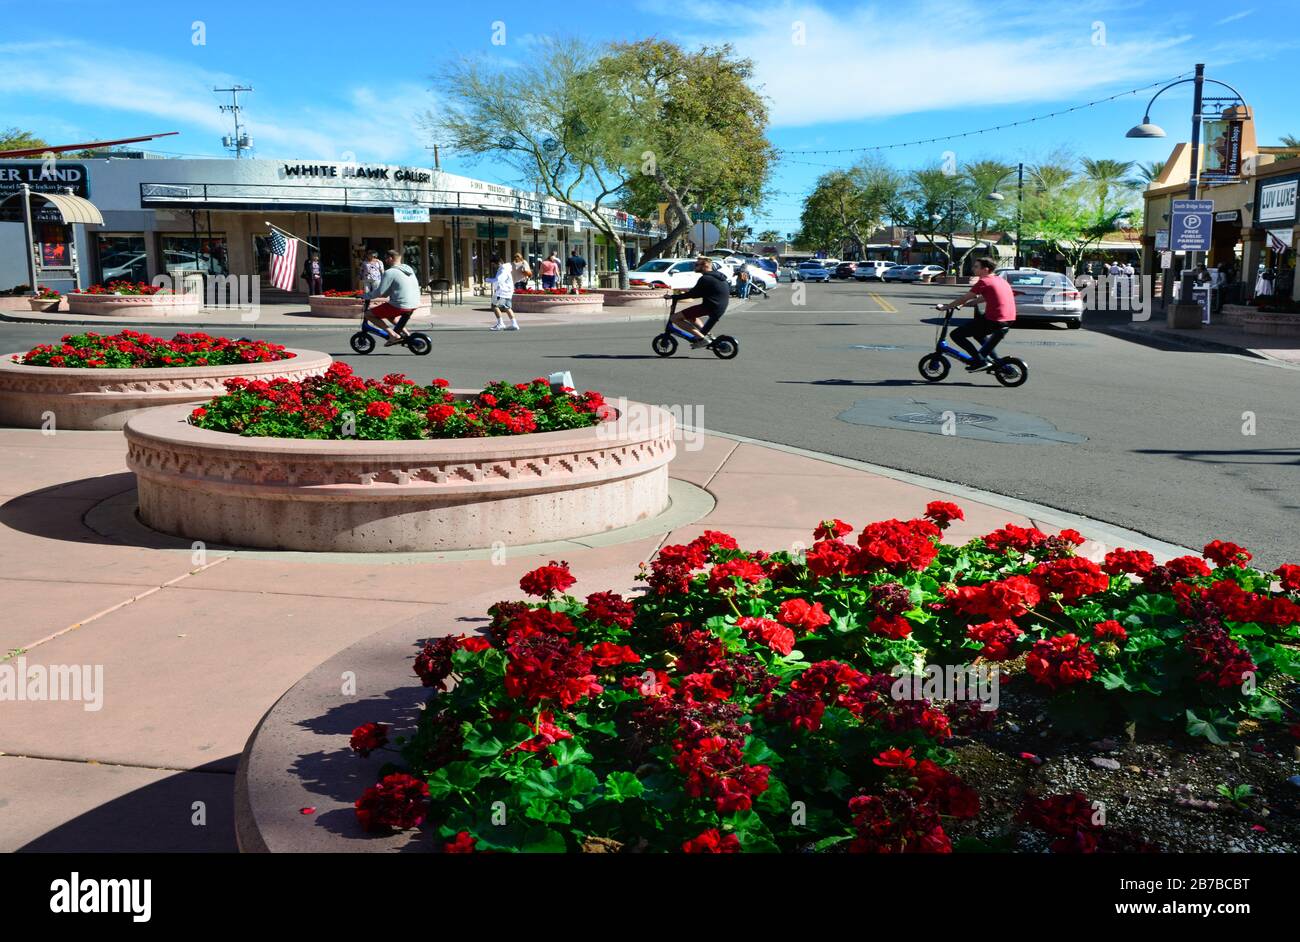 Three young men on electric scooters speed near red geraniums in foreground and galleries, restaurants and shopping district in Scottsdale, AZ Stock Photo